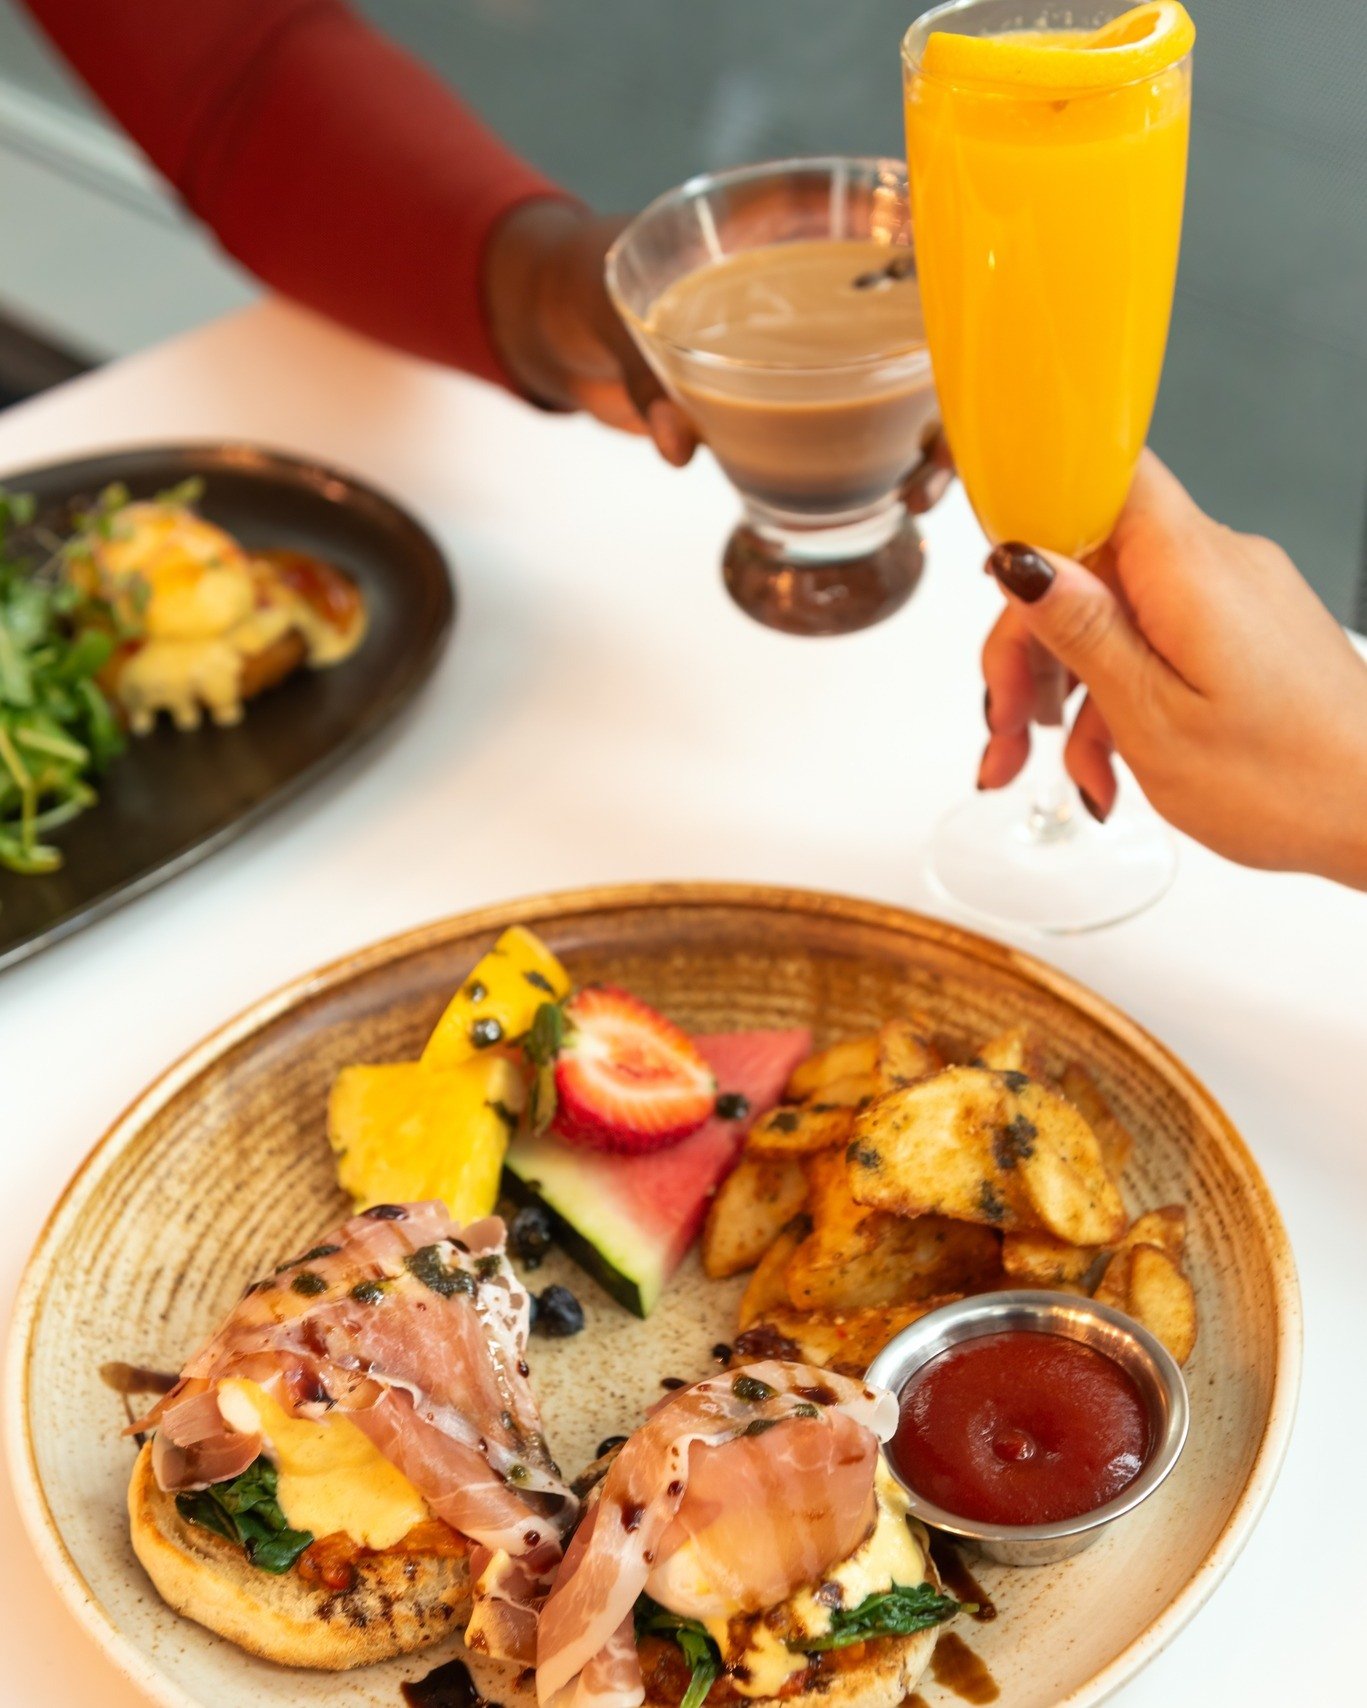 🥂✨ Brunching with friends is the ultimate weekend vibe! Cheers to good food and great company, the perfect recipe for lifting spirits and creating lasting memories. 🍳🥞 

Let's toast to laughter, shared stories, and the joy of gathering around a ta